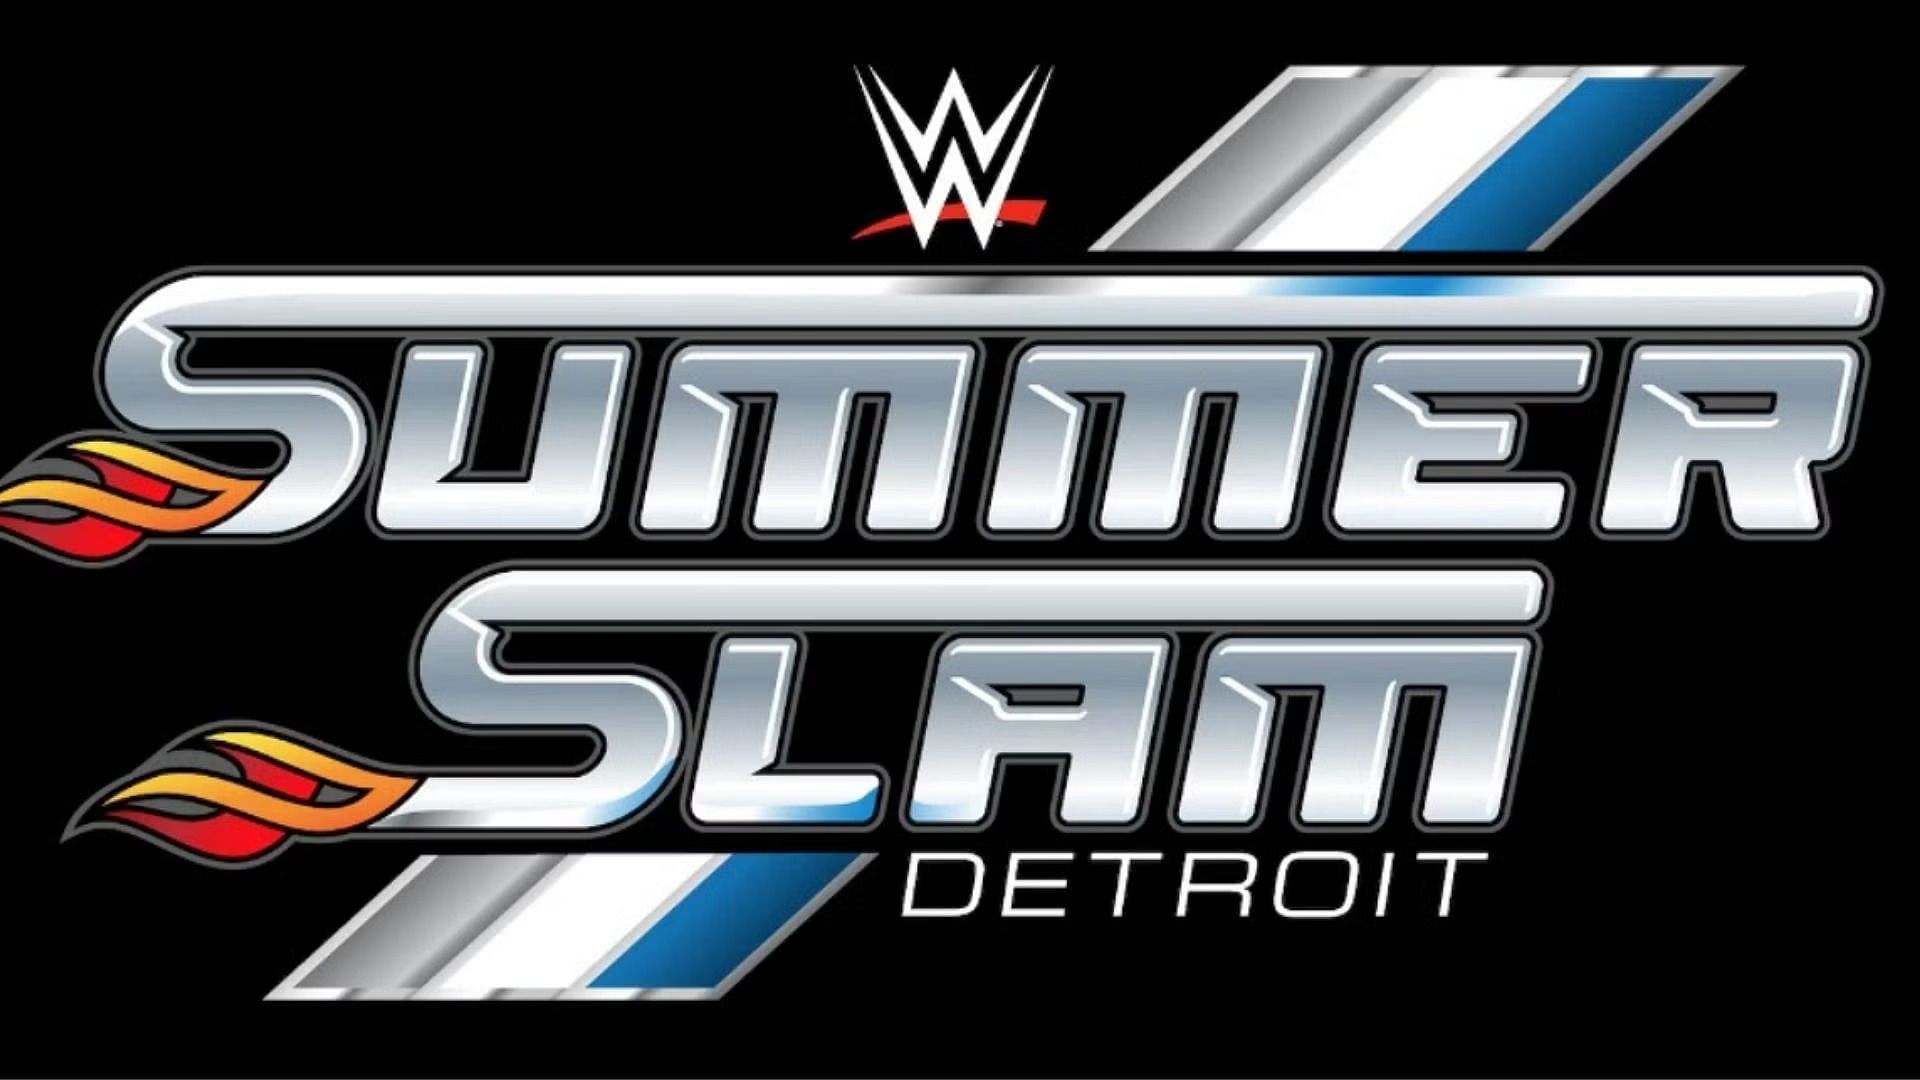 WWE SummerSlam will take place this Saturday in Detroit.